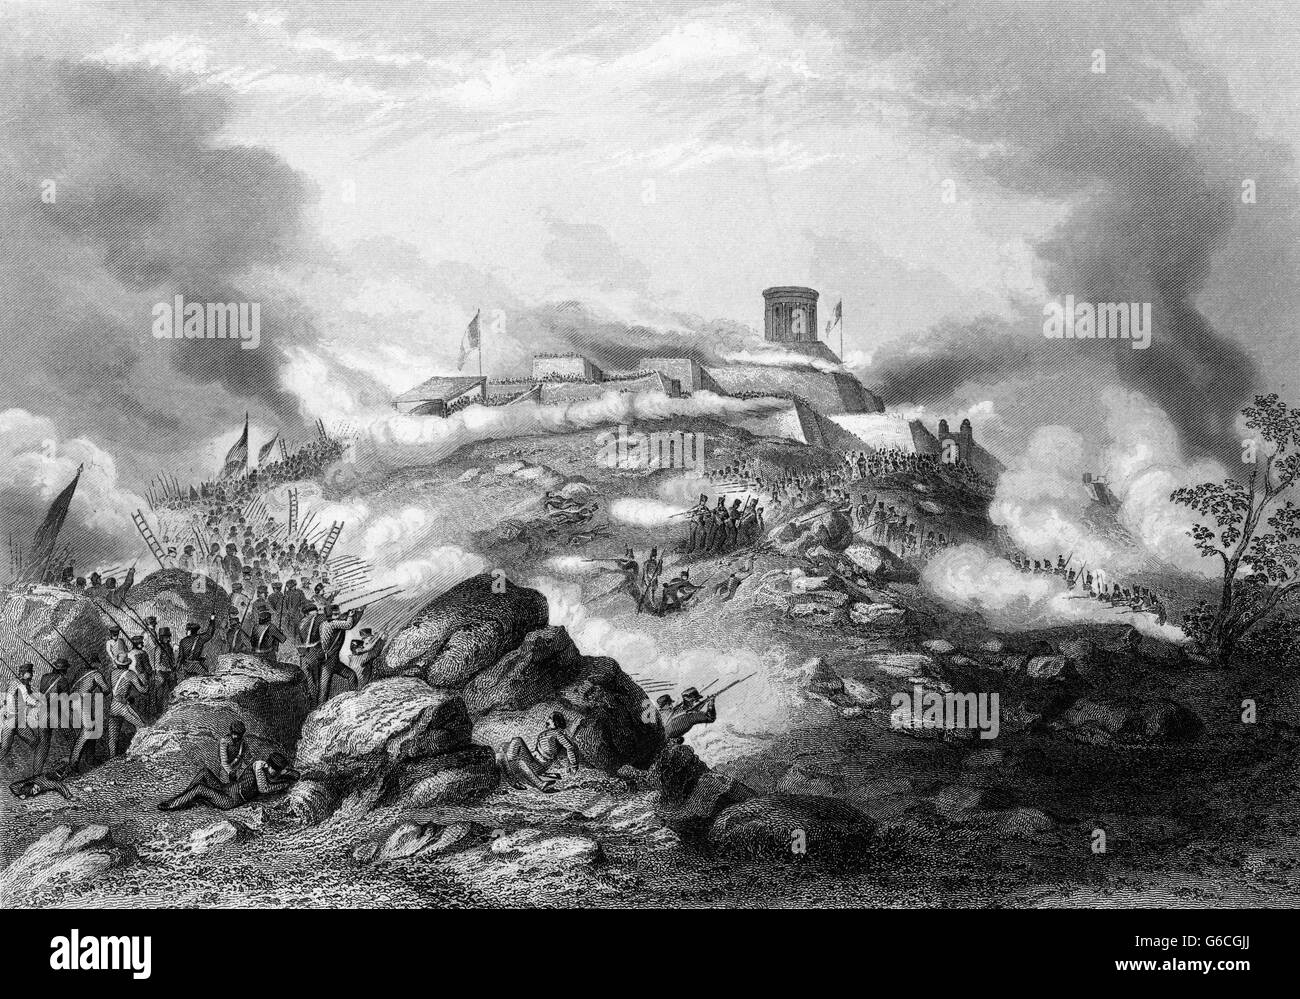 1840s SEPTEMBER 1847 MEXICAN-AMERICAN WAR THE BATTLE OF CHAPULTEPEC NEAR MEXICO CITY Stock Photo